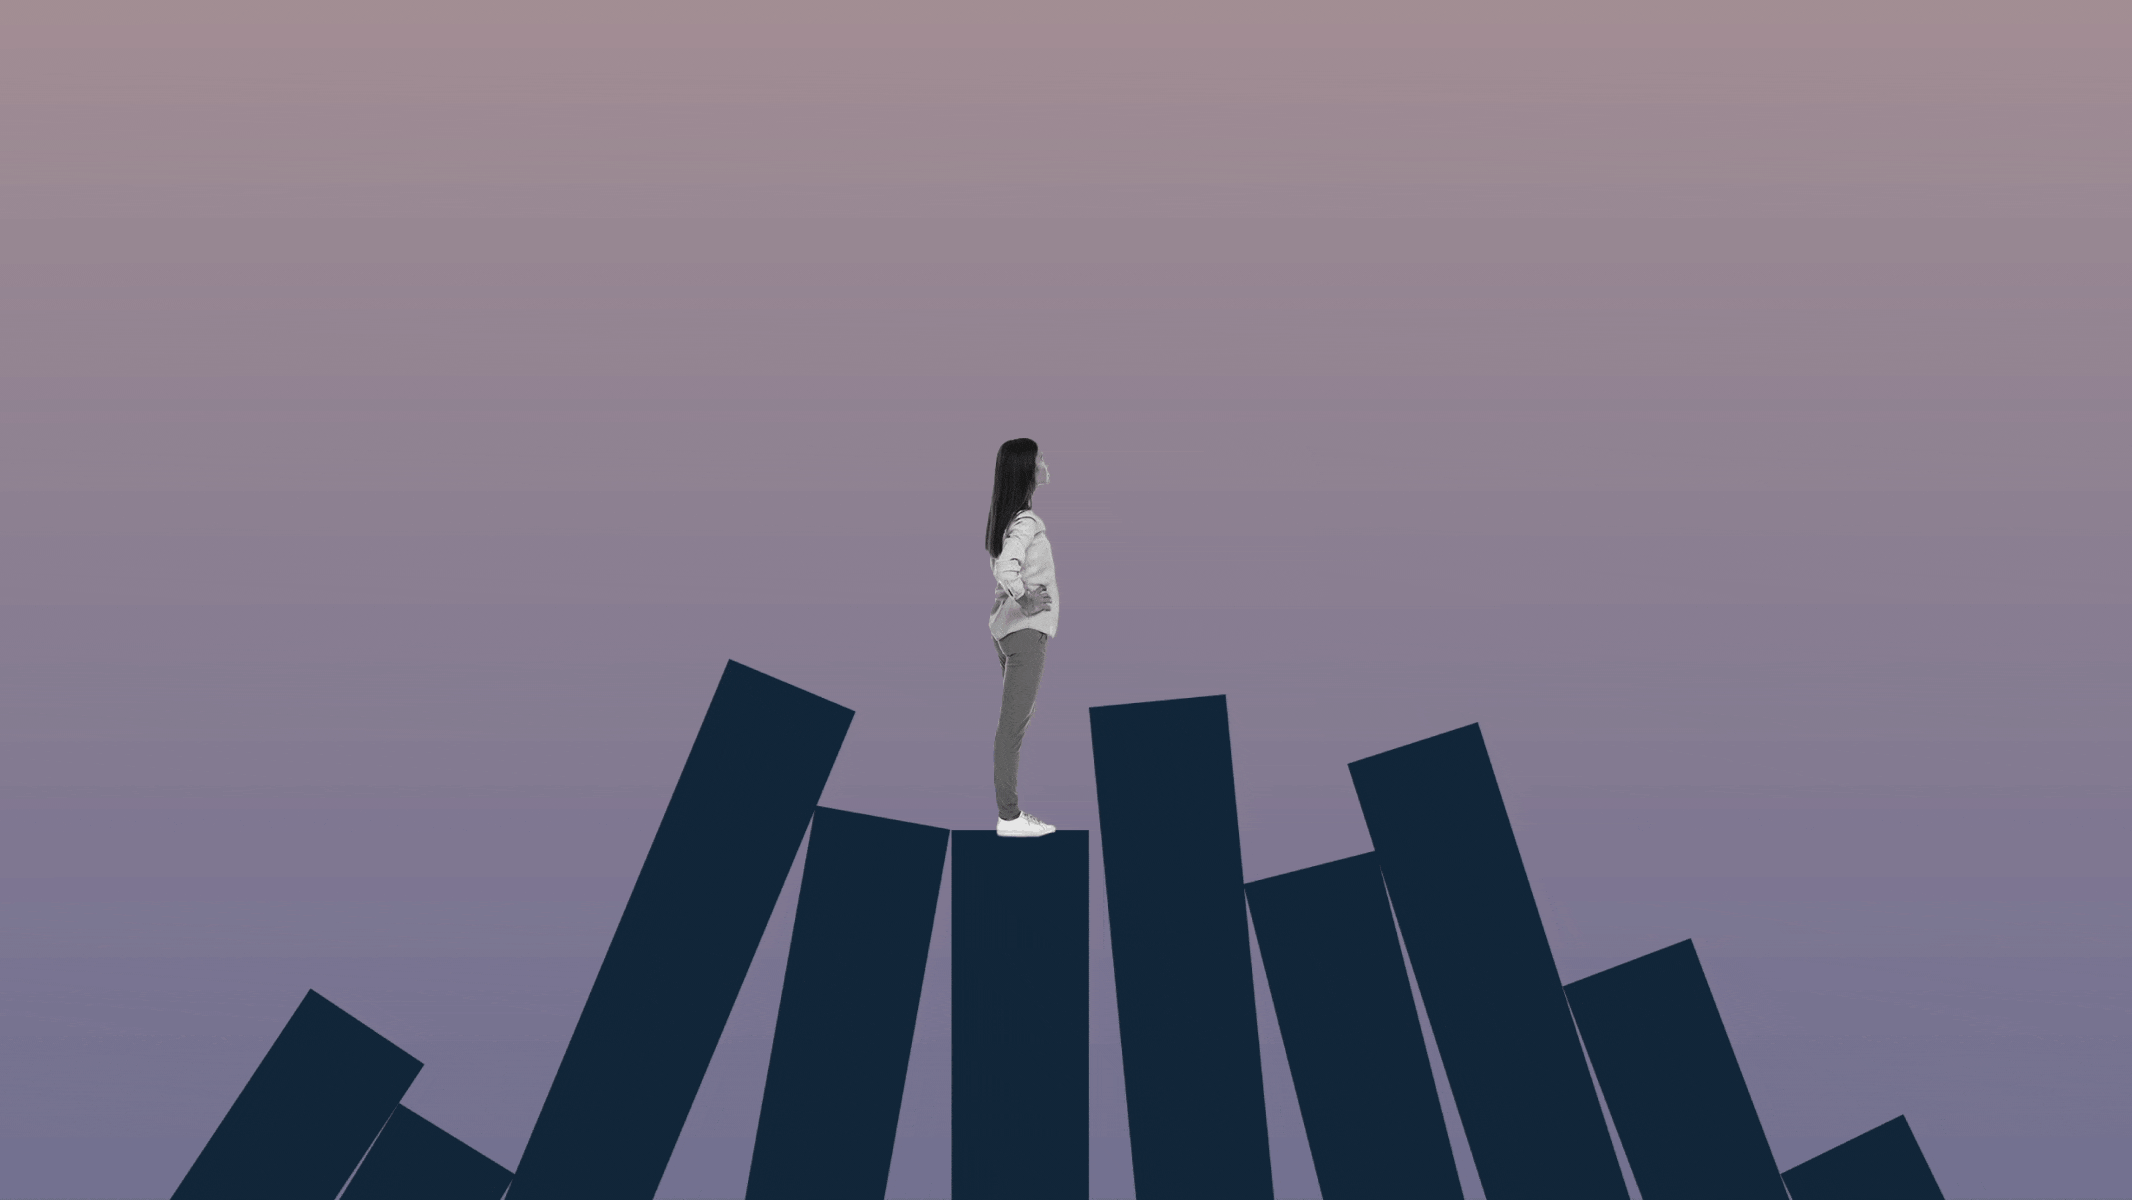 Animated illustration of woman standing on a pillar that is rising